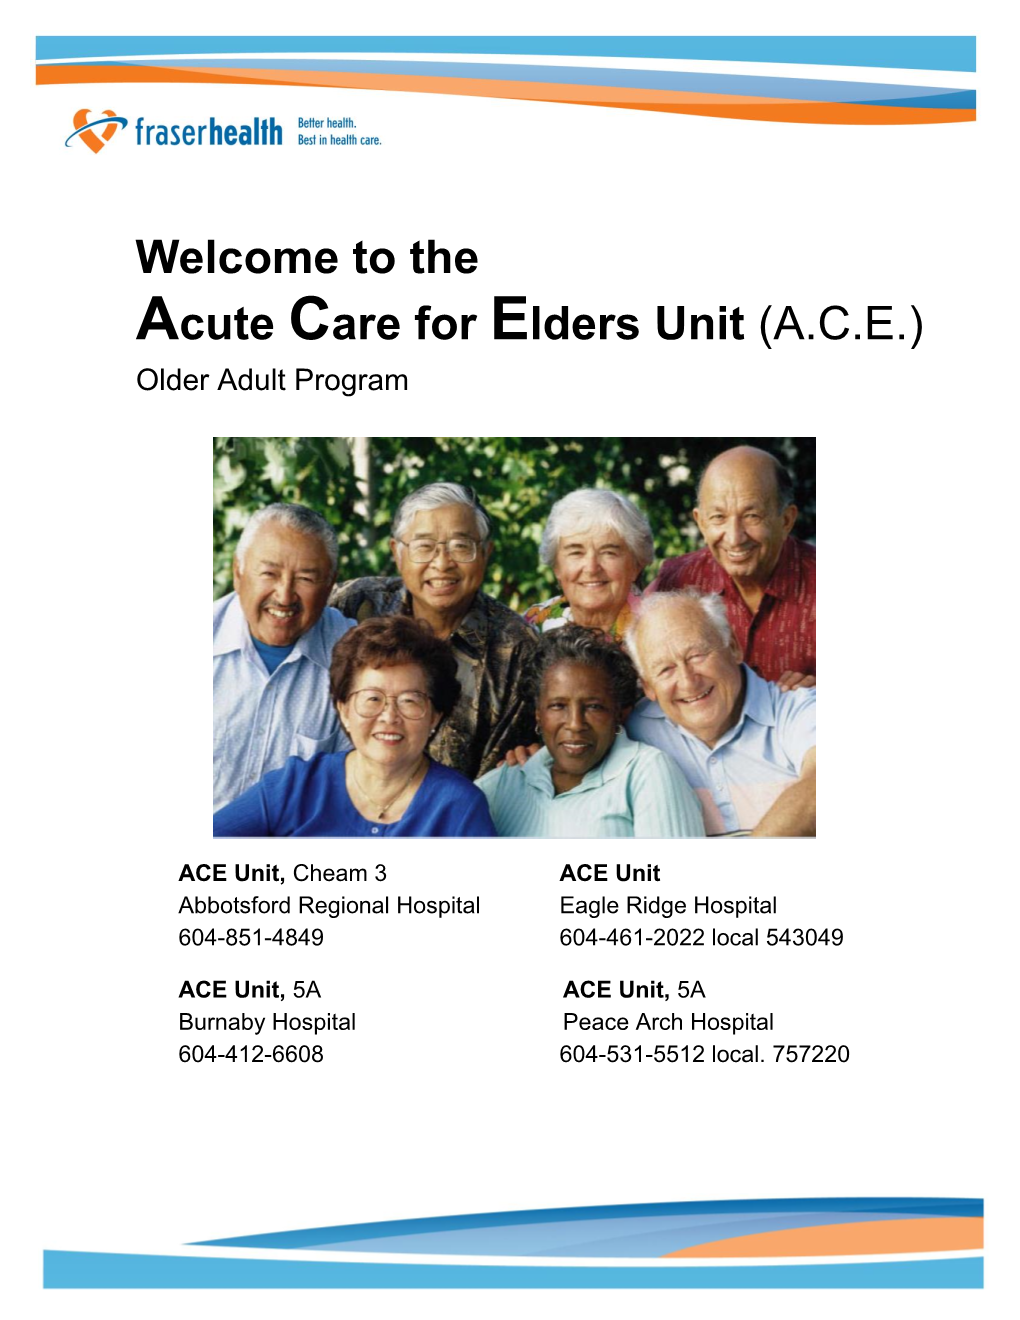 Welcome to the Acute Care for Elders Unit (A.C.E.) Older Adult Program